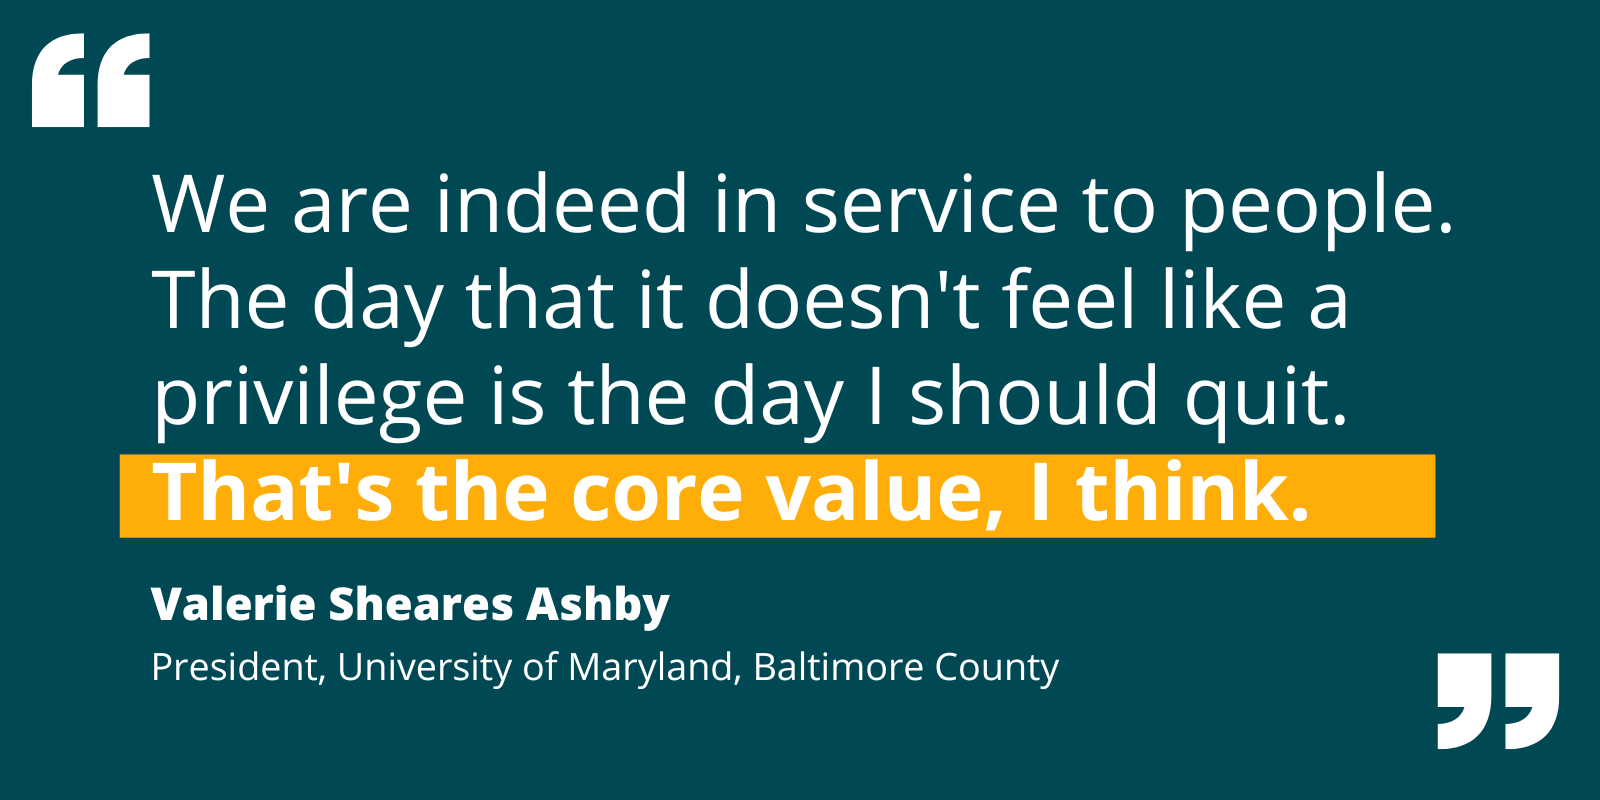 Quote by Valerie Sheares Ashby re: the privilege of serving others, and how service is a core value of leadership.